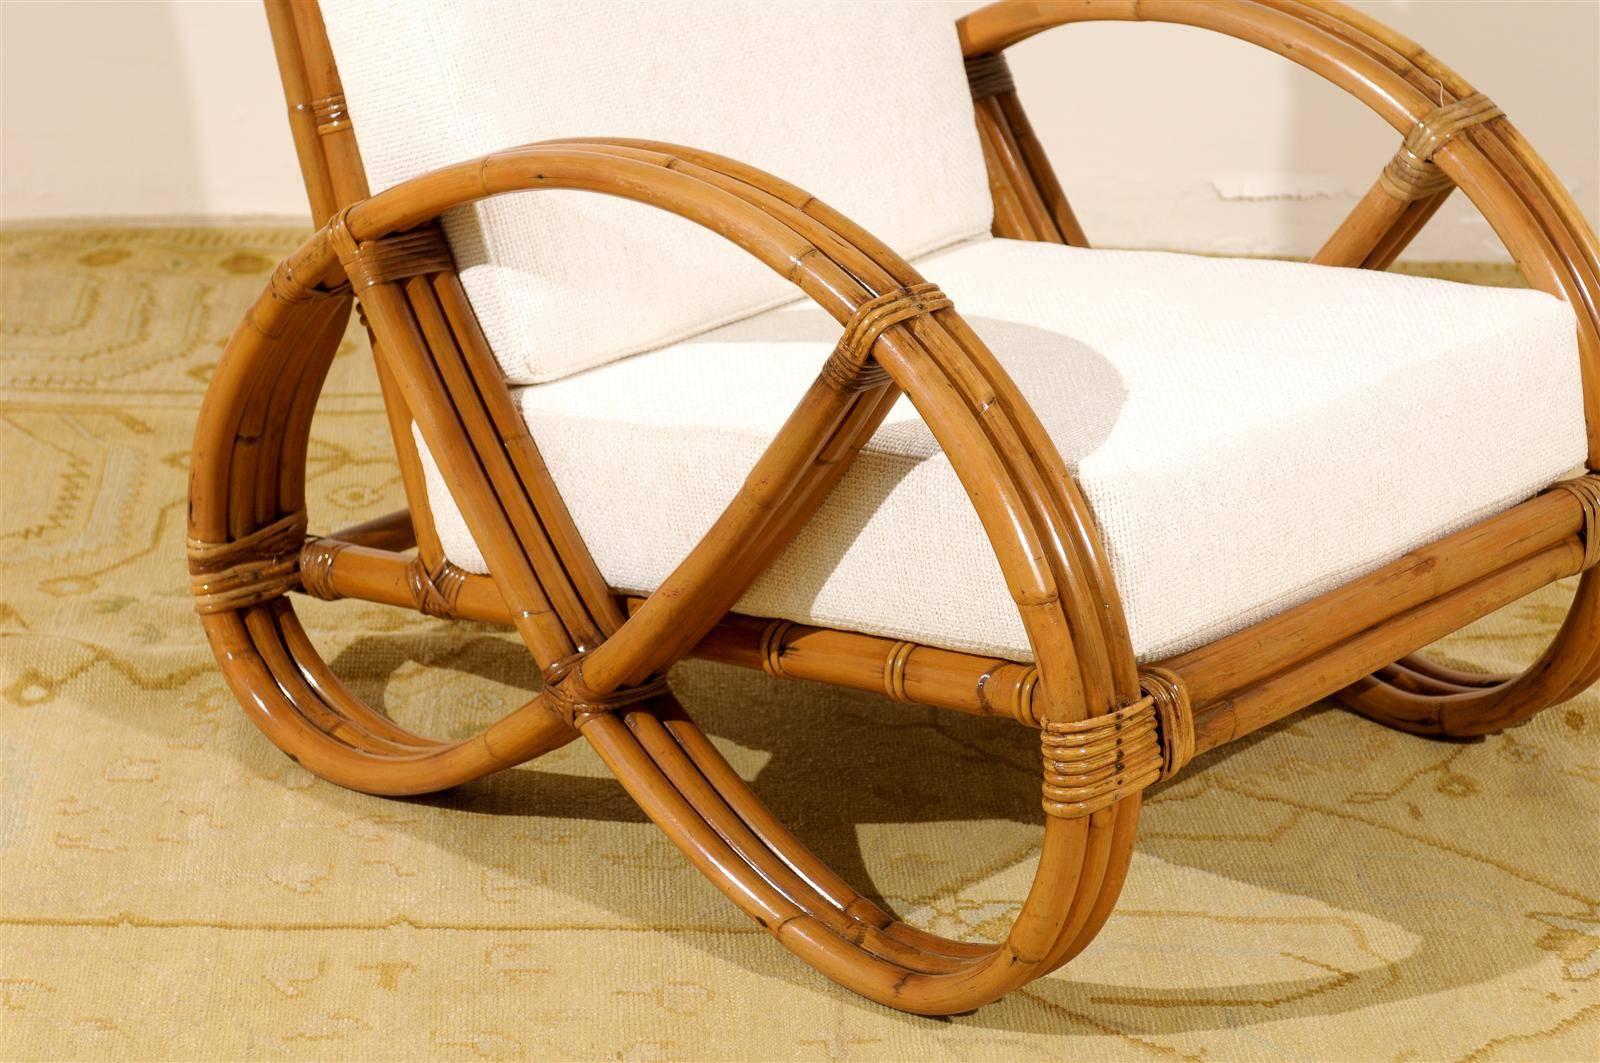 Stellar Restored Pair of Rattan Pretzel and Cane Loungers, circa 1940 In Excellent Condition For Sale In Atlanta, GA